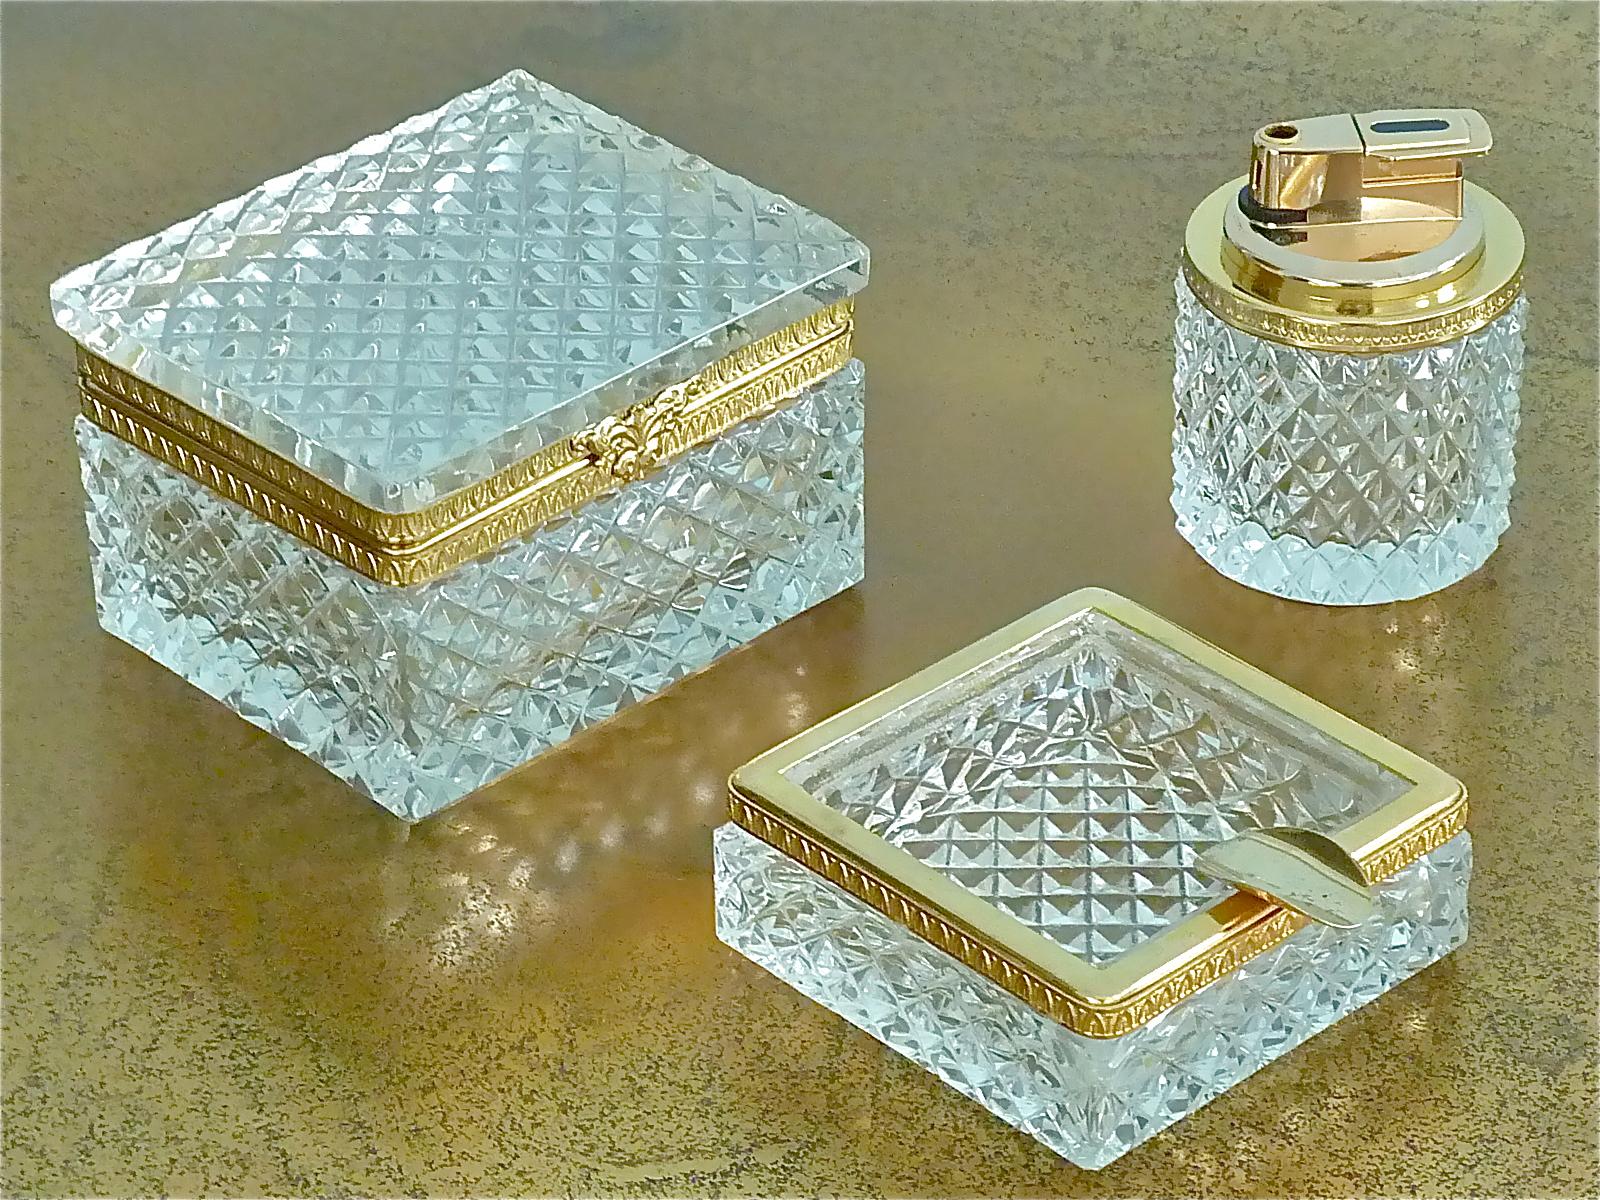 Gorgeous mid-century hand-cut and faceted crystal glass smoking set with decorative gilt brass metal rim made by Baccarat France attribution, circa 1950-1960. The exquisite french set which comprises one ashtray, one table lighter and one cigarette